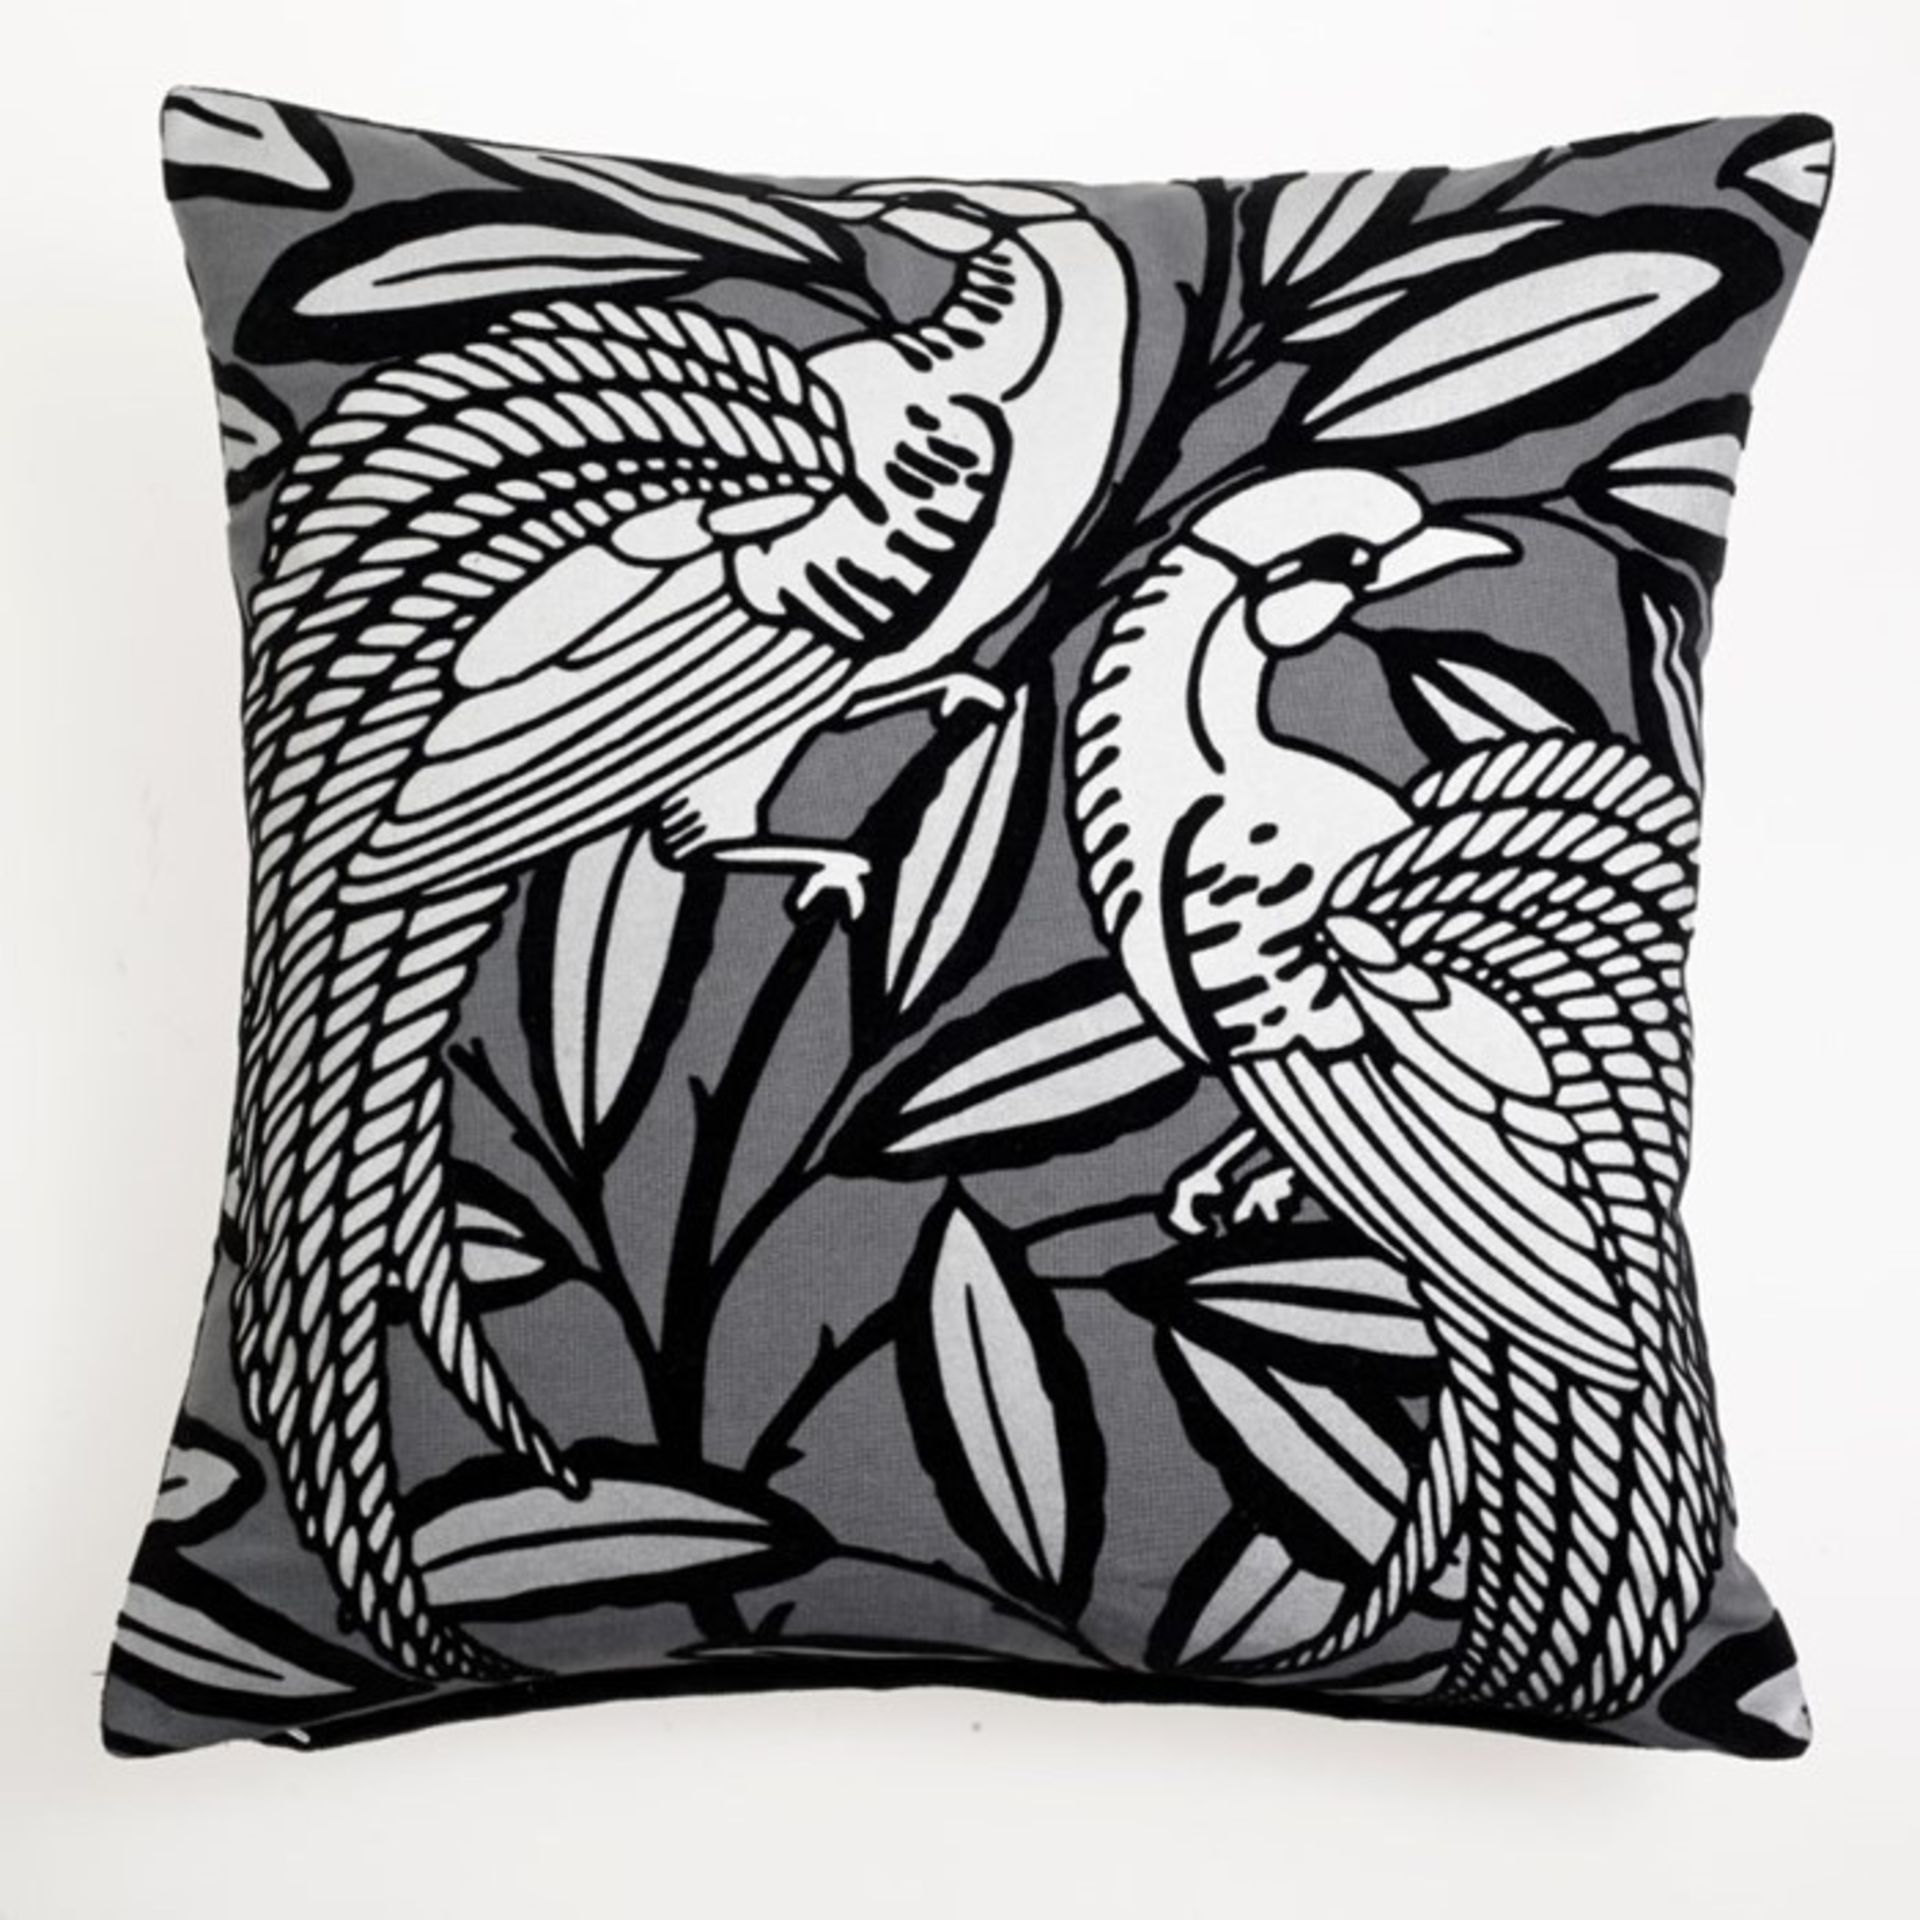 1 BRAND NEW PACKAGED ARTHOUSE TAILFEATHER BLACK CUSHION 300116 (VIEWING HIGHLY RECOMMENDED)